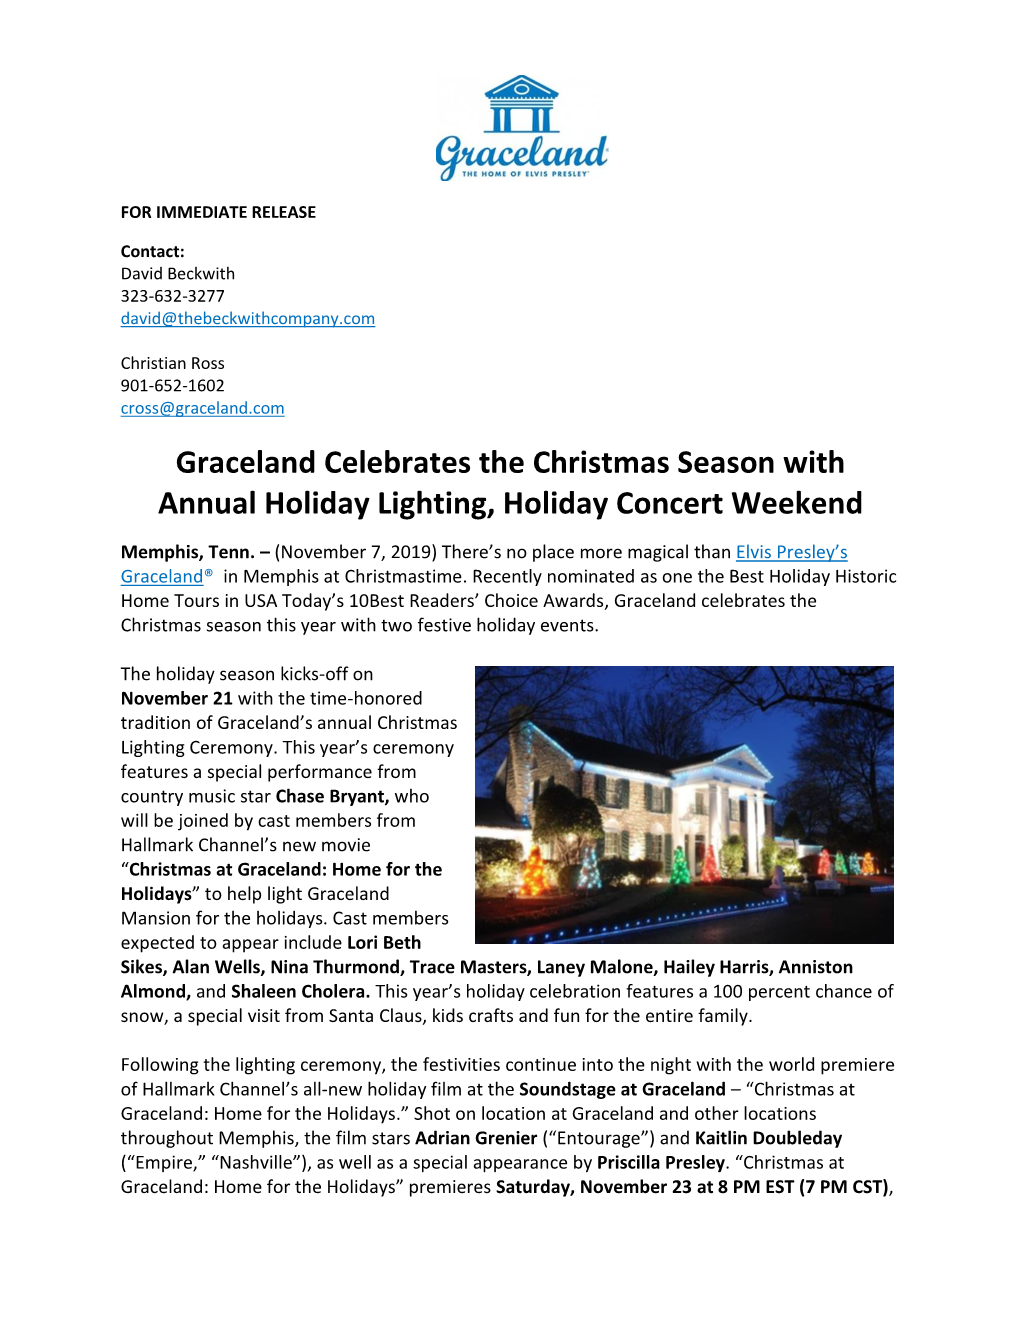 Graceland Celebrates the Christmas Season with Annual Holiday Lighting, Holiday Concert Weekend